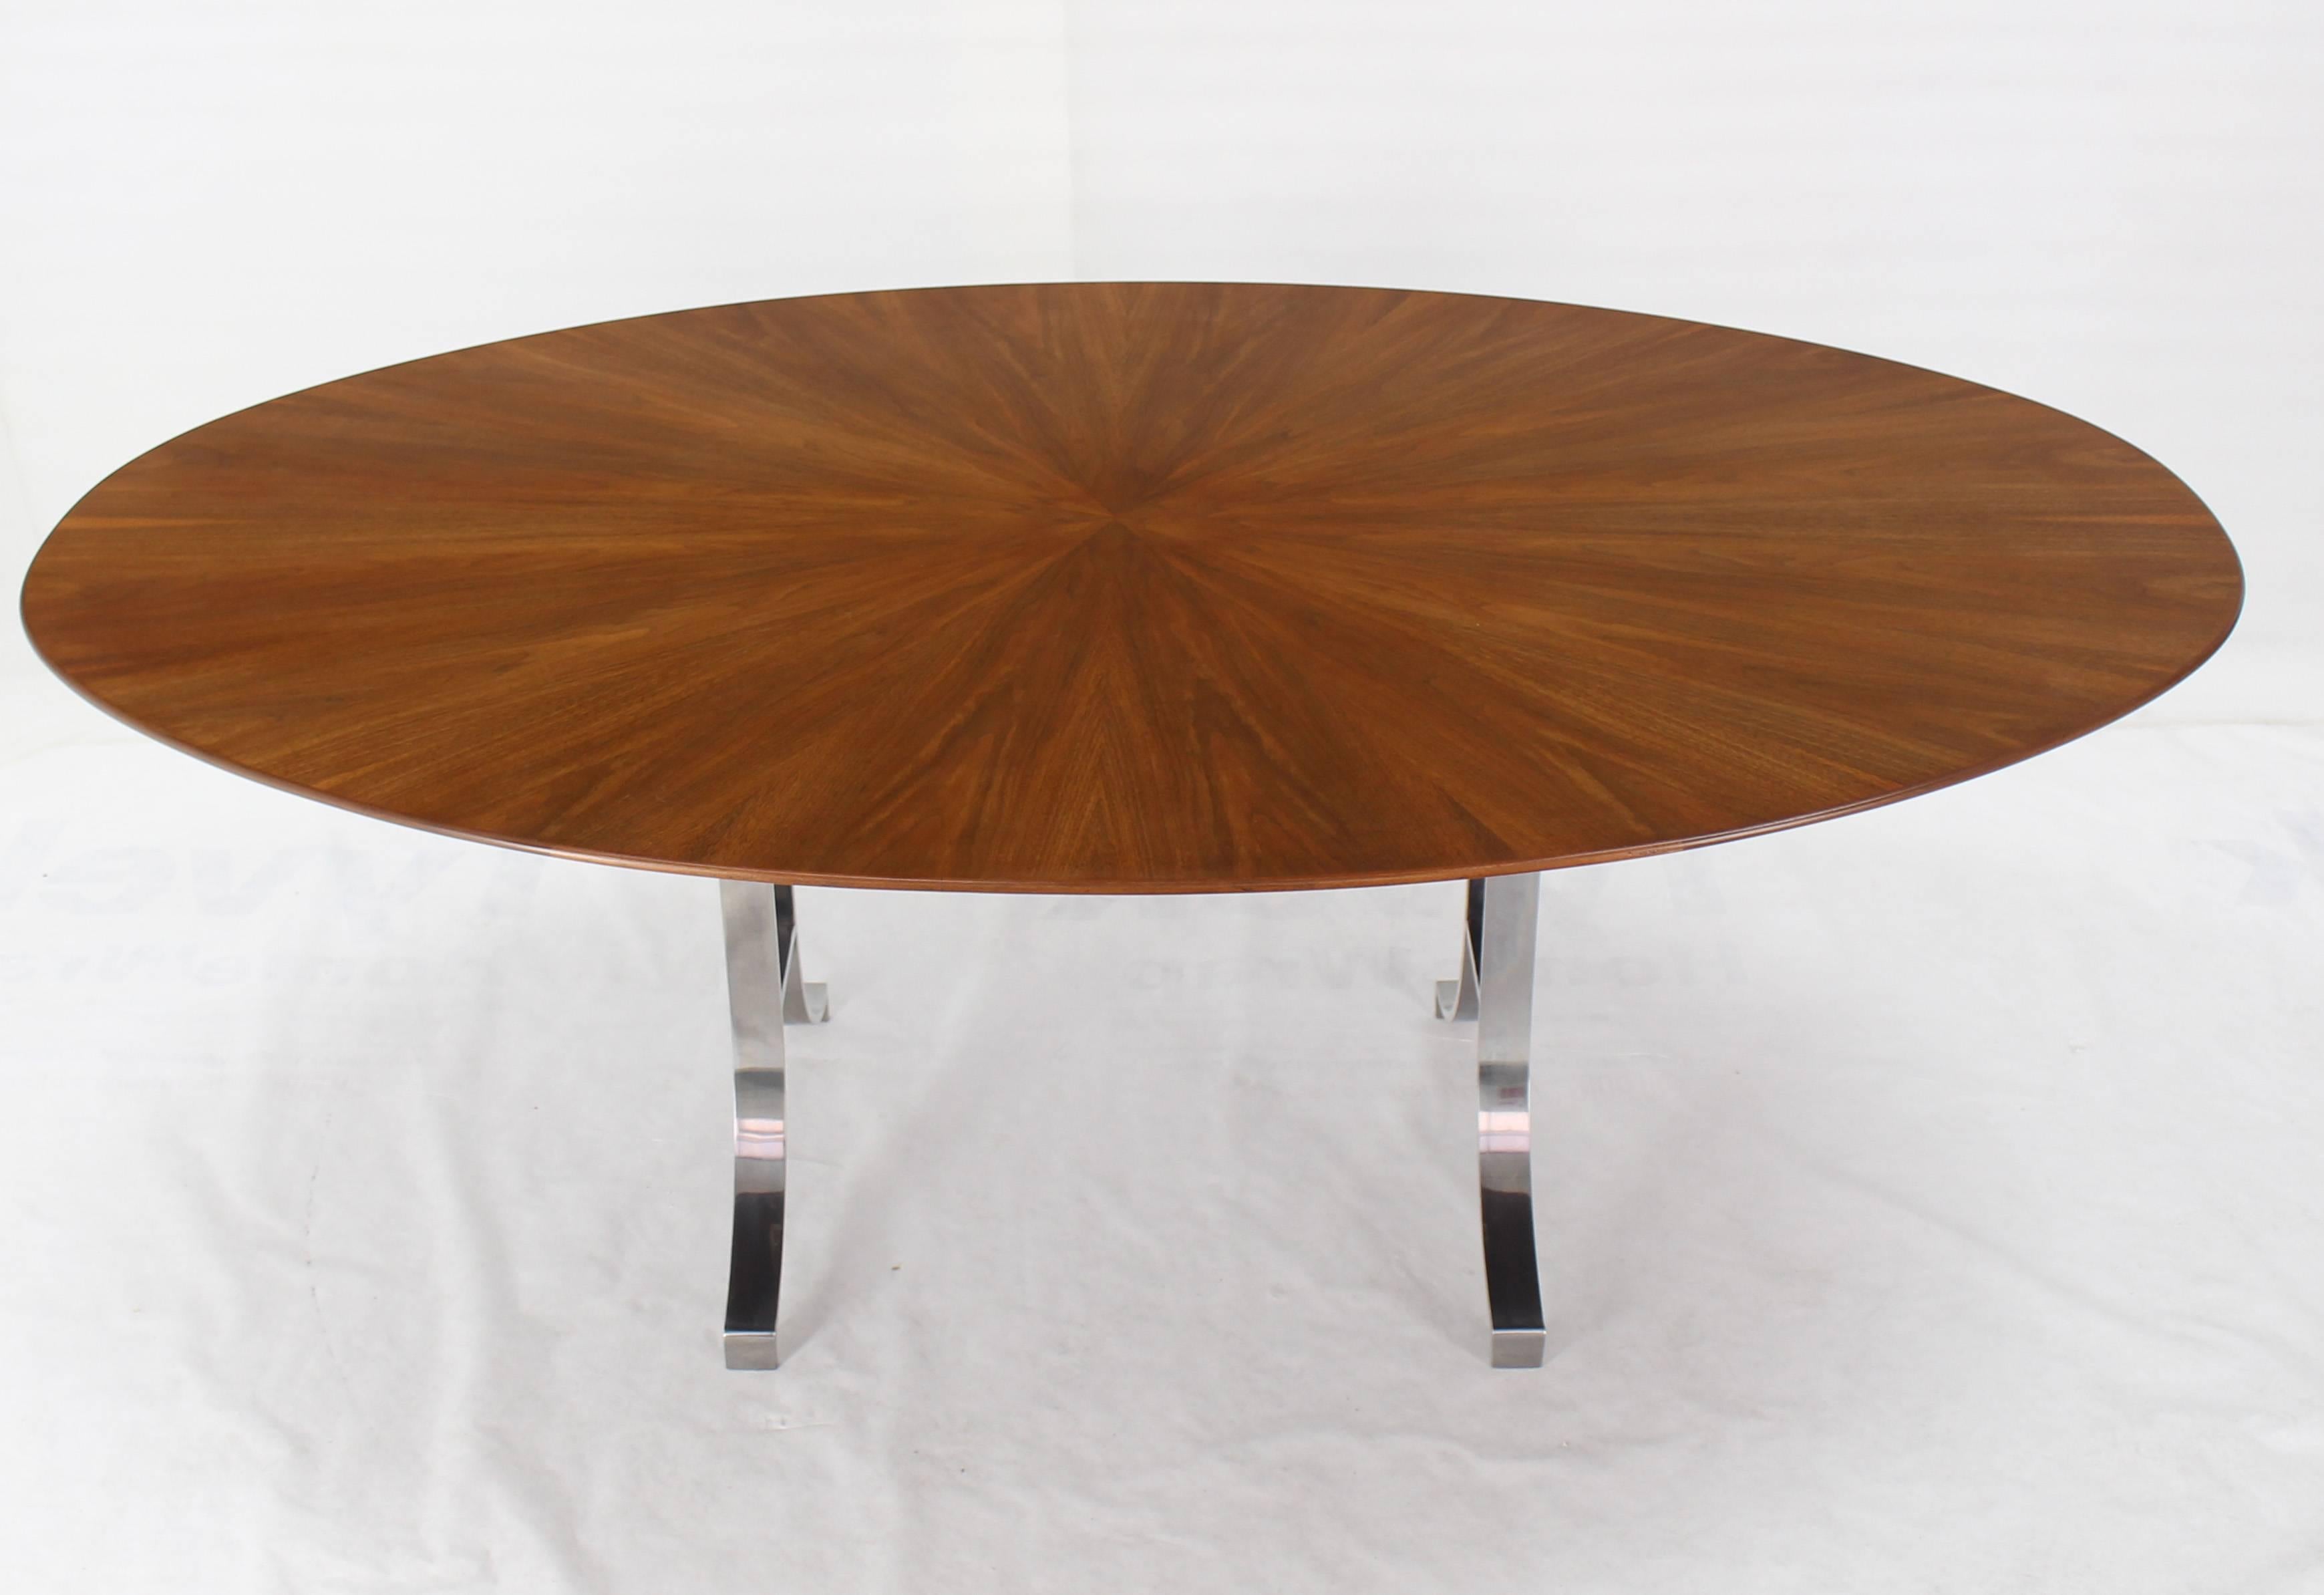 Lacquered American Oval Walnut Top Stainless Steel Base Dining Conference Table